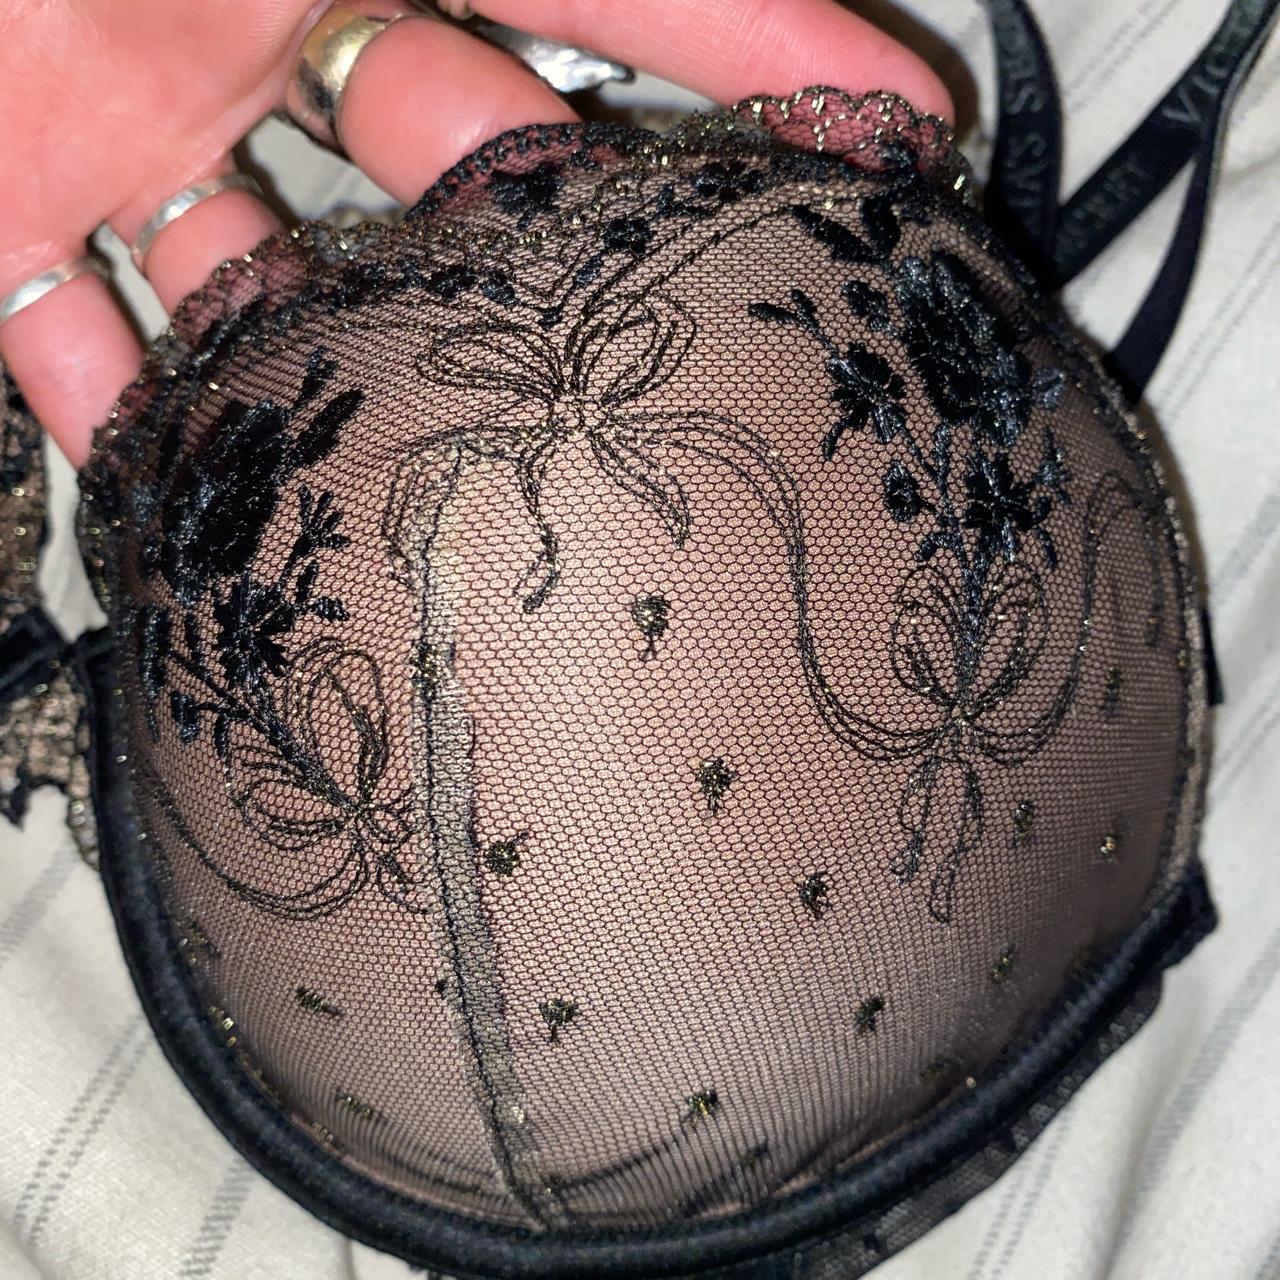 Gorgeous embroidered lace push up bra from